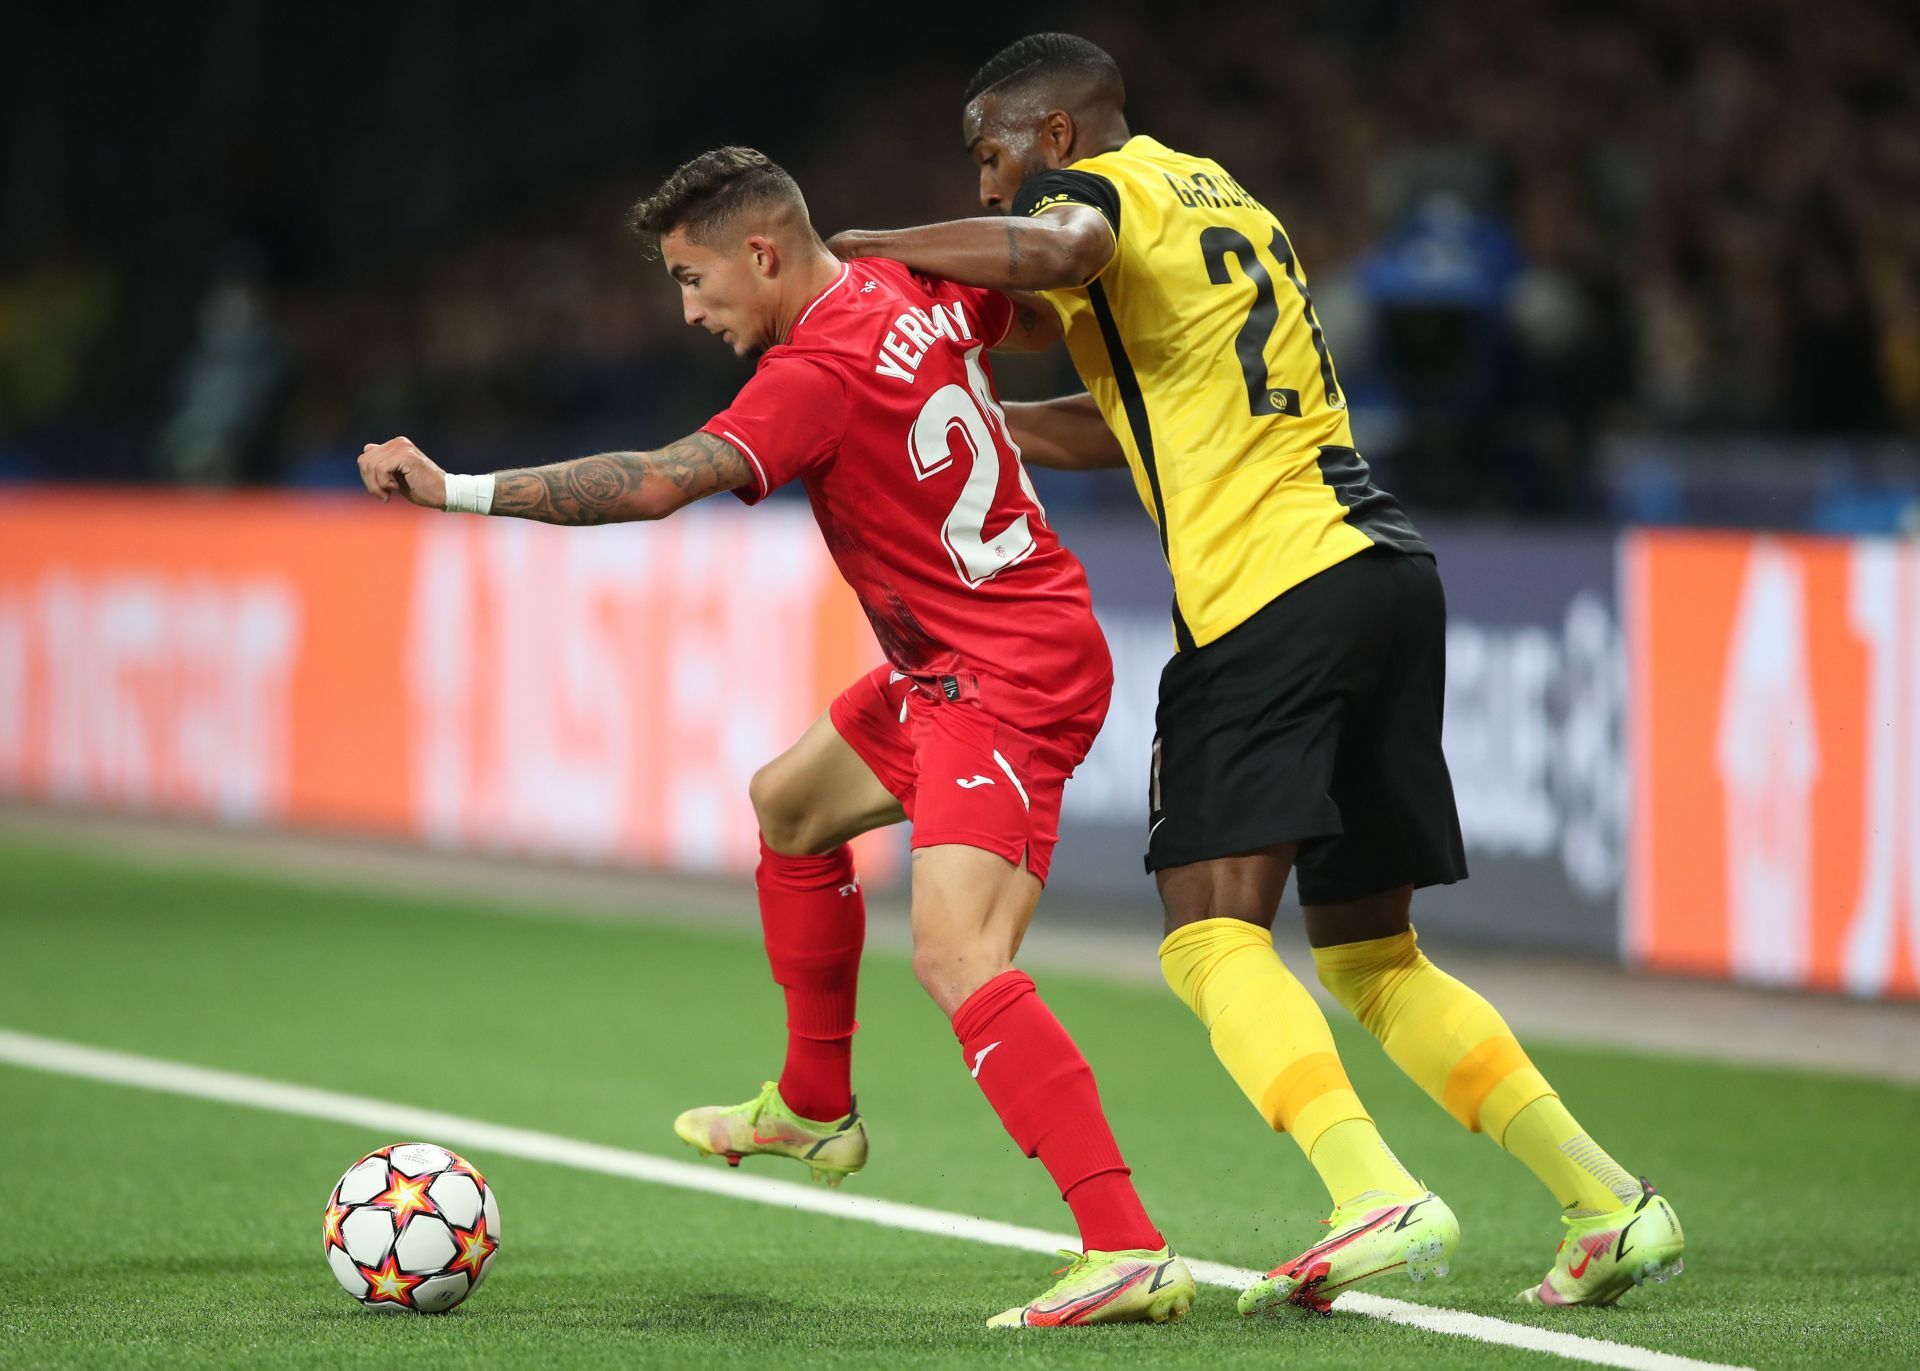 Yeremi Pino of Villarreal CF holds off Ulisses Garcia of BSC Young Boys